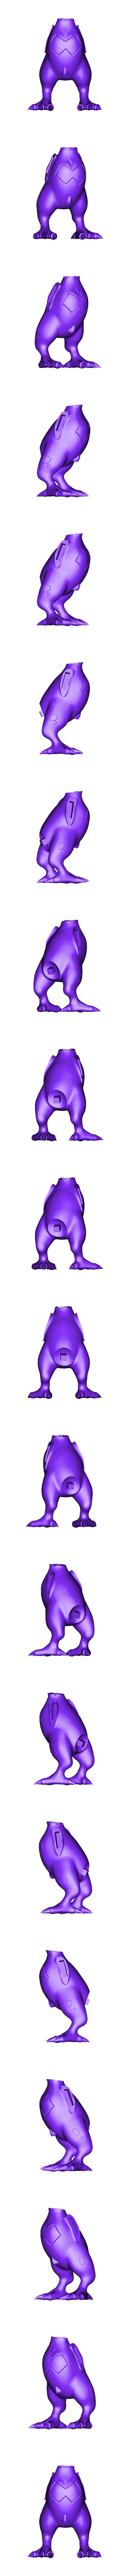 body1.obj Download OBJ file Pokemon - Tornadus Therian(with cuts and as a whole) • 3D printing template, ErickFontoura3D